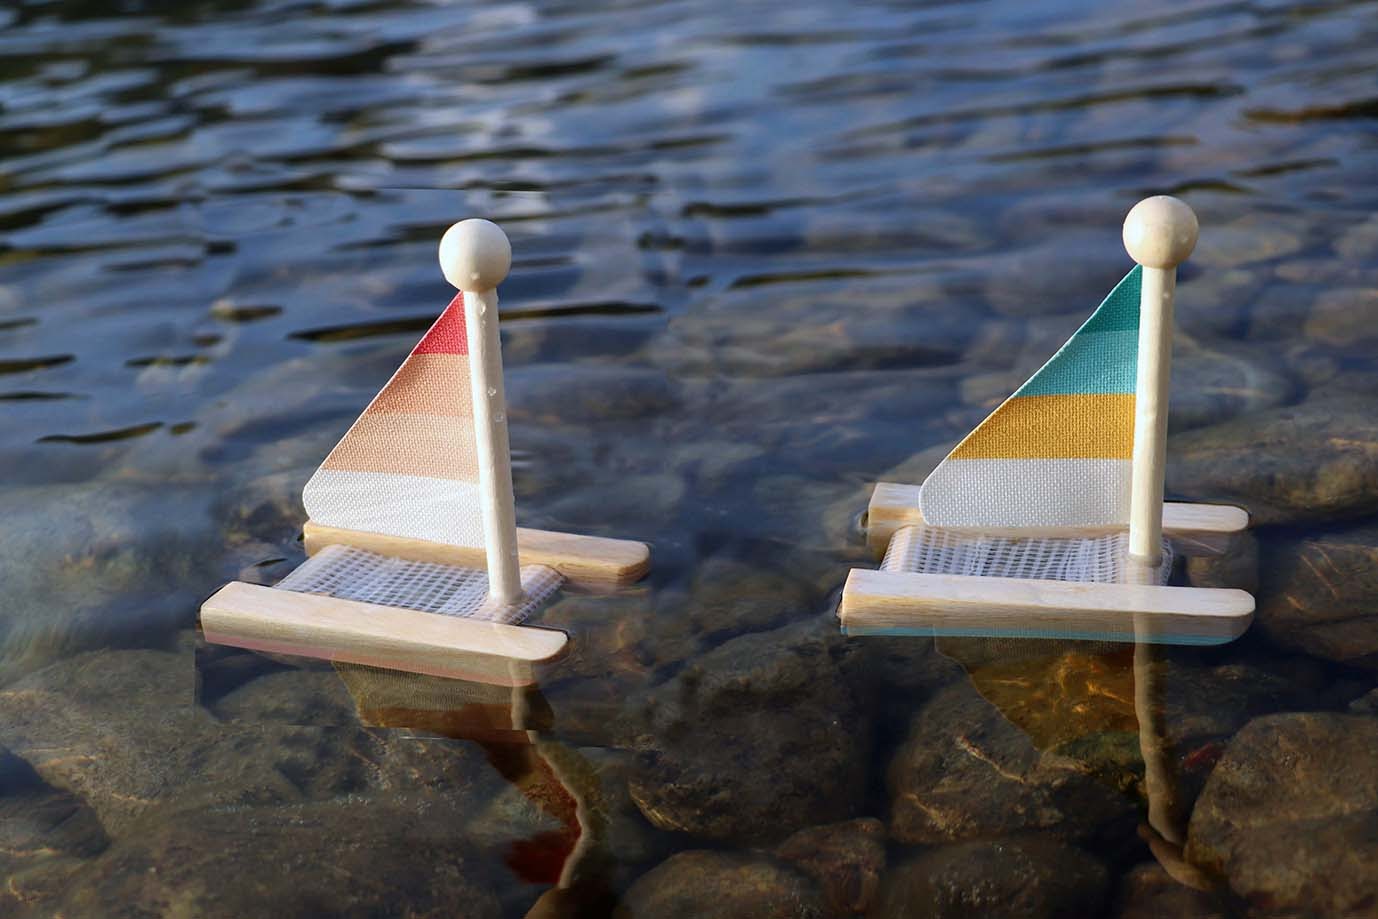 Wooden Toy Boats Kids Fun